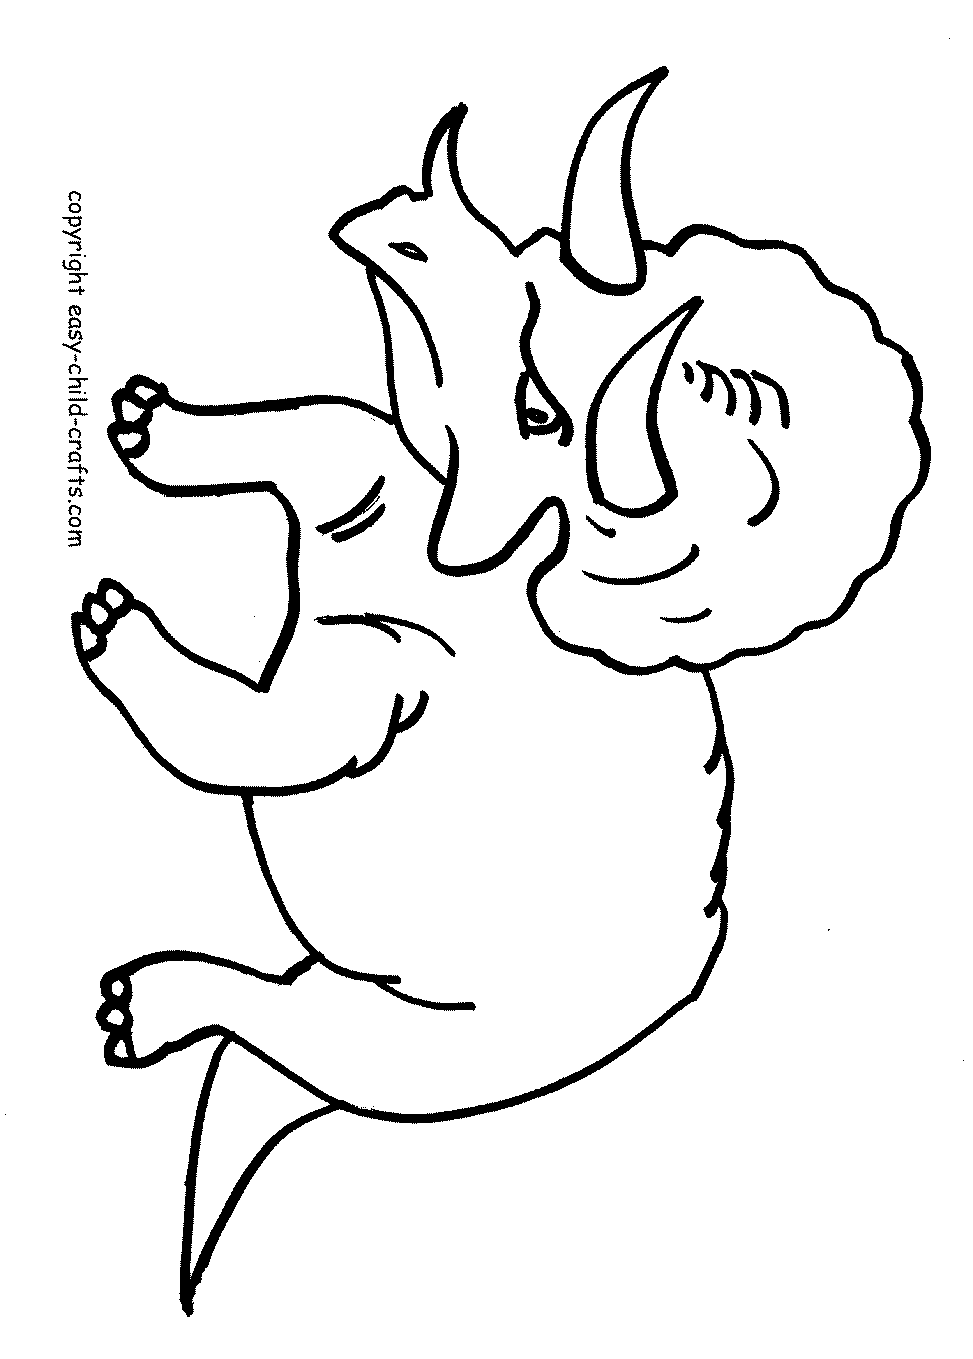 dino coloring page coloring dinosaur coloring pages coloring page dino 